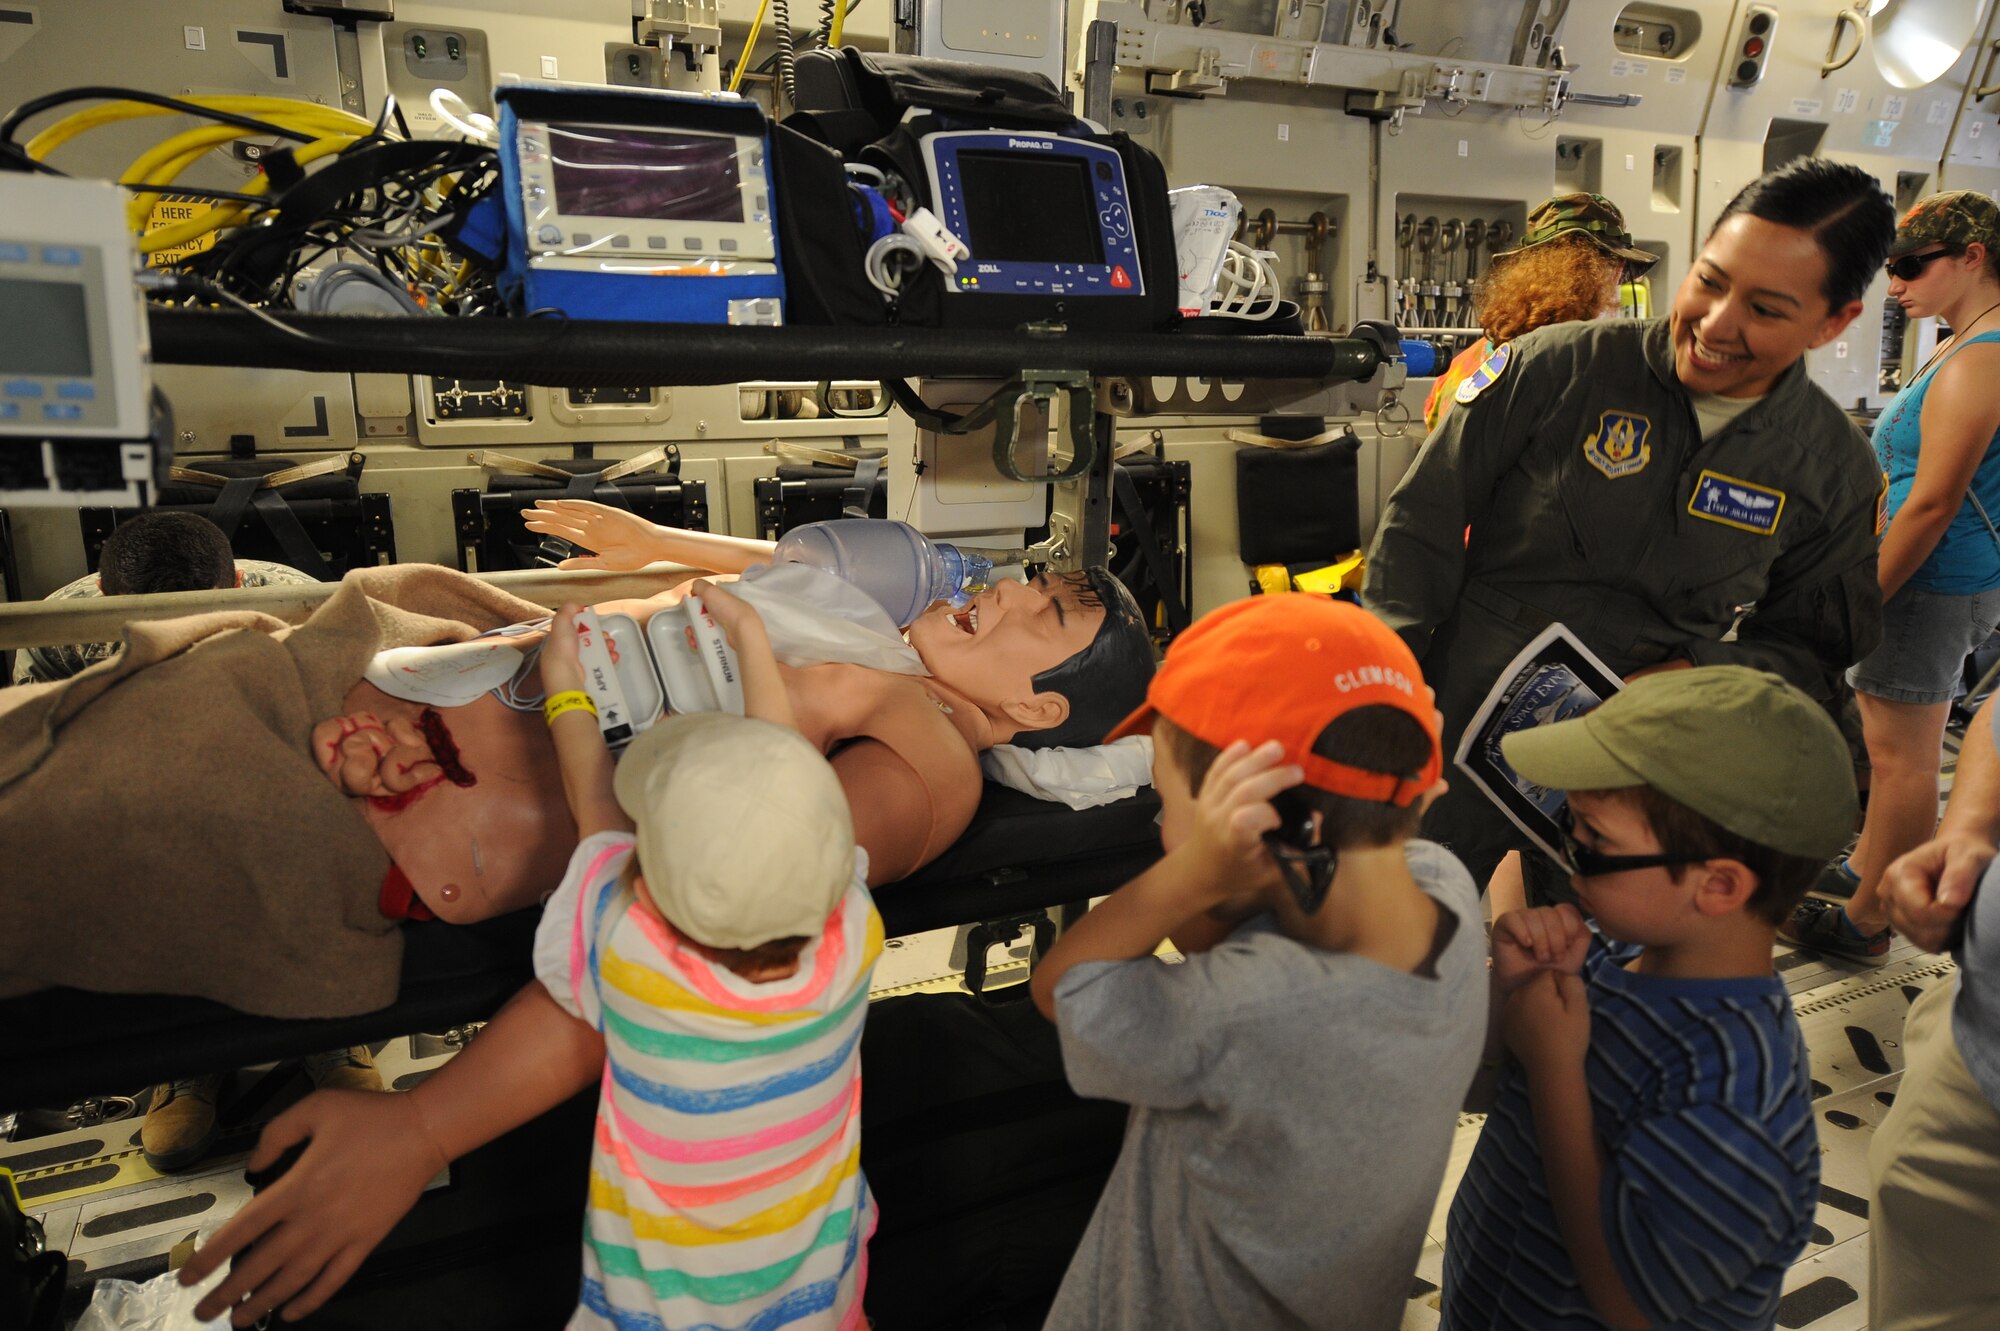 Tech. Sgt. Julia Lopez from the 315th Aeromedical Evacuation Squadron, shows children how defibrillator paddles work while on a C-17 Globemaster III during the Air and Space Expo April 28, 2018, at Joint Base Charleston, S.C.